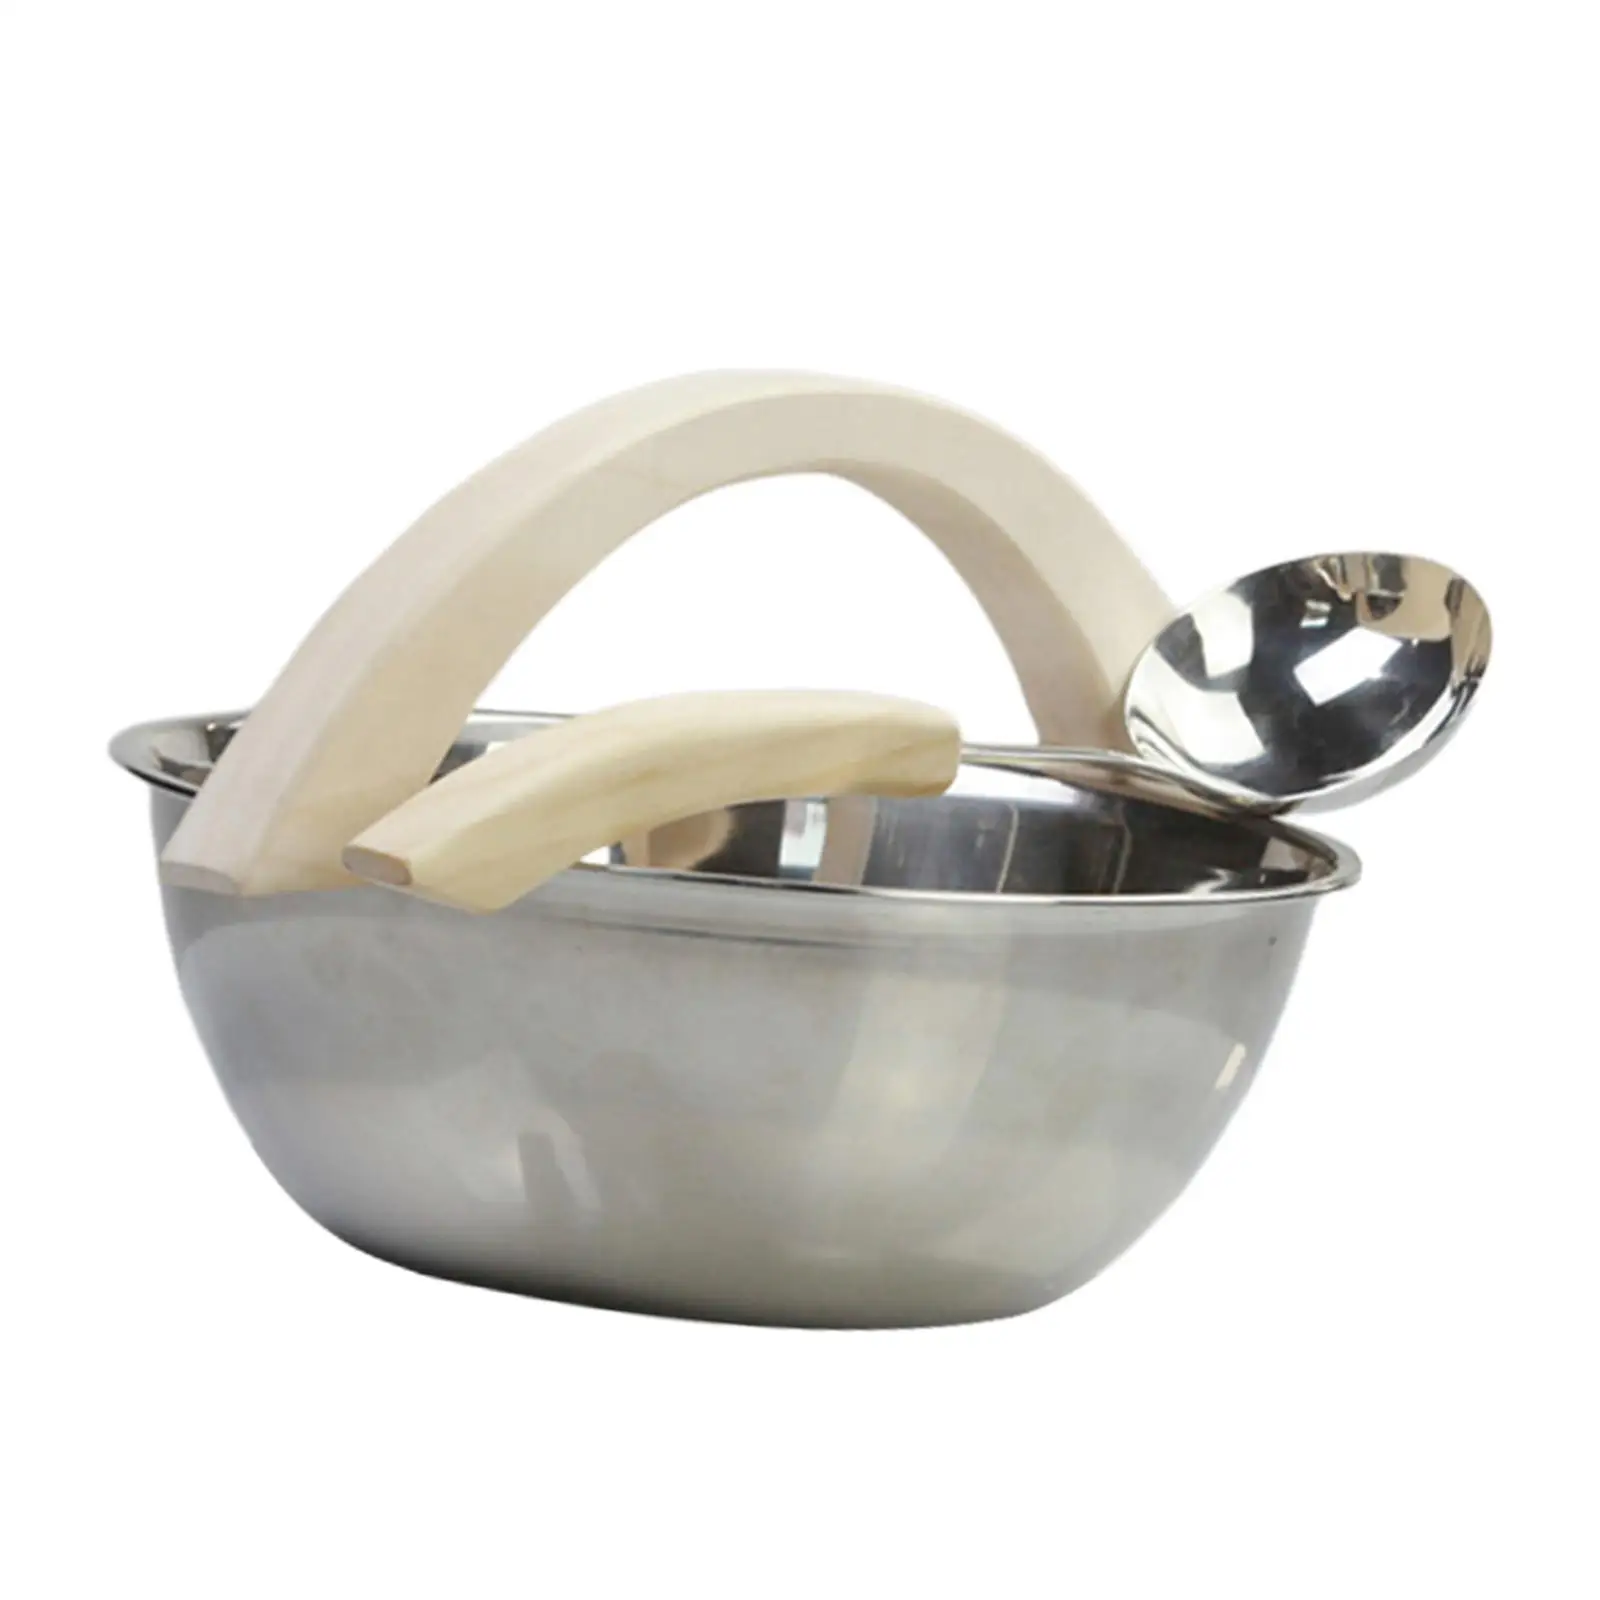 7L  Barrel Stainless Steel Basin with Long Handle Spoon  Room Accessory Practical Use Durable Accessory Wooden Handles